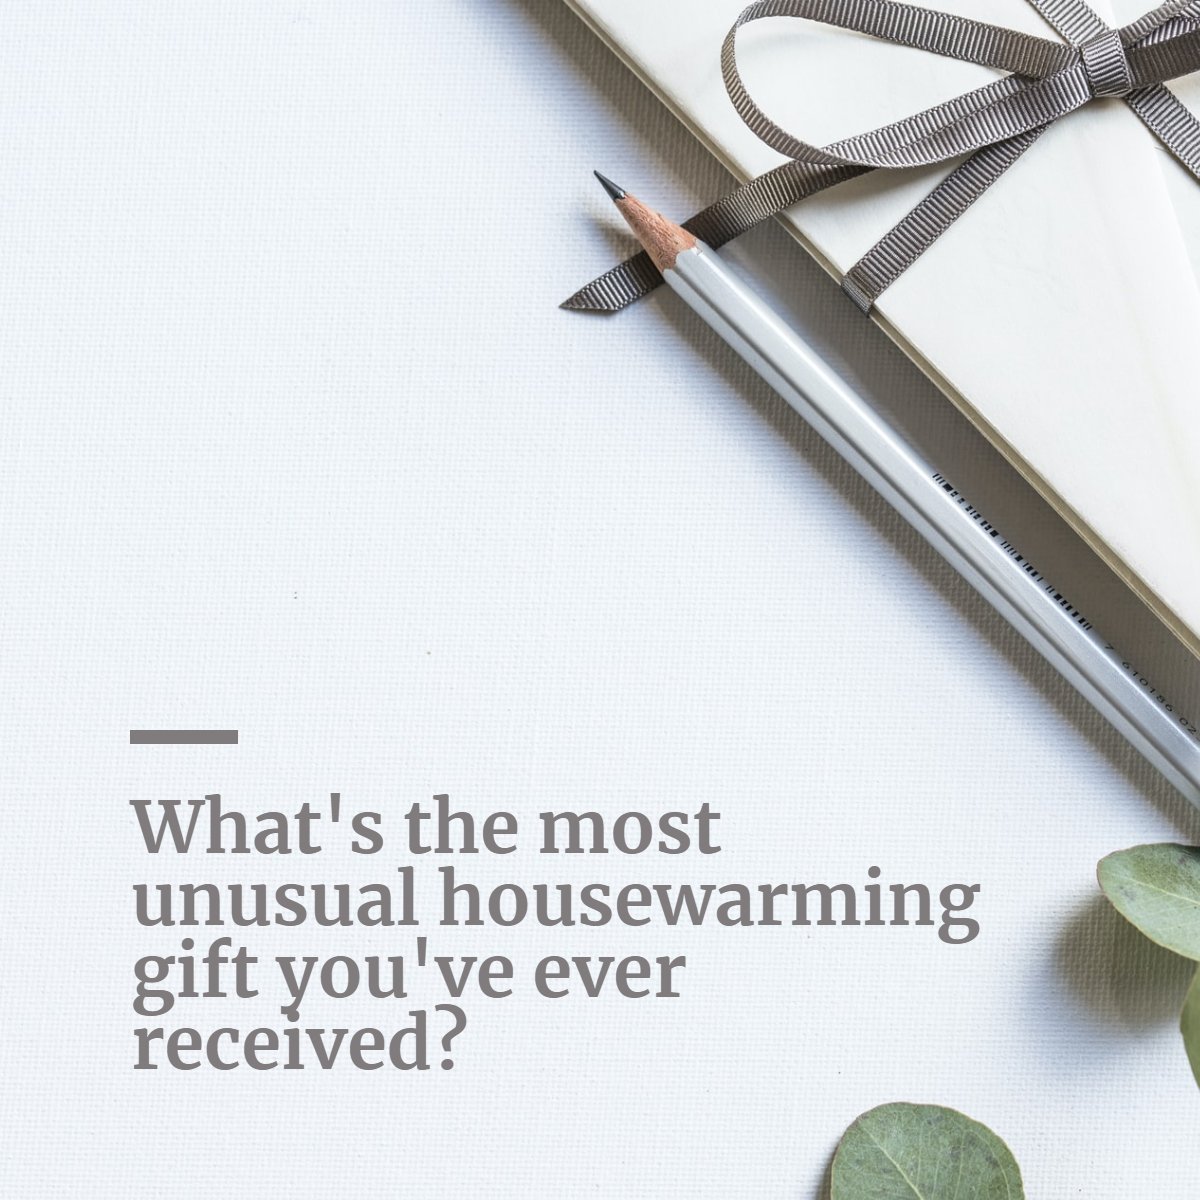 What's the most unusual housewarming gift you've ever received? 🎁

#housewarming #housewarminggift #homeowner #rentvsown #realestatefun #realestate 
 #hotharfordhomesforsale #findyourdreamhomenow #marylanddreamhomes #realestategoals #sellyourhomewithme